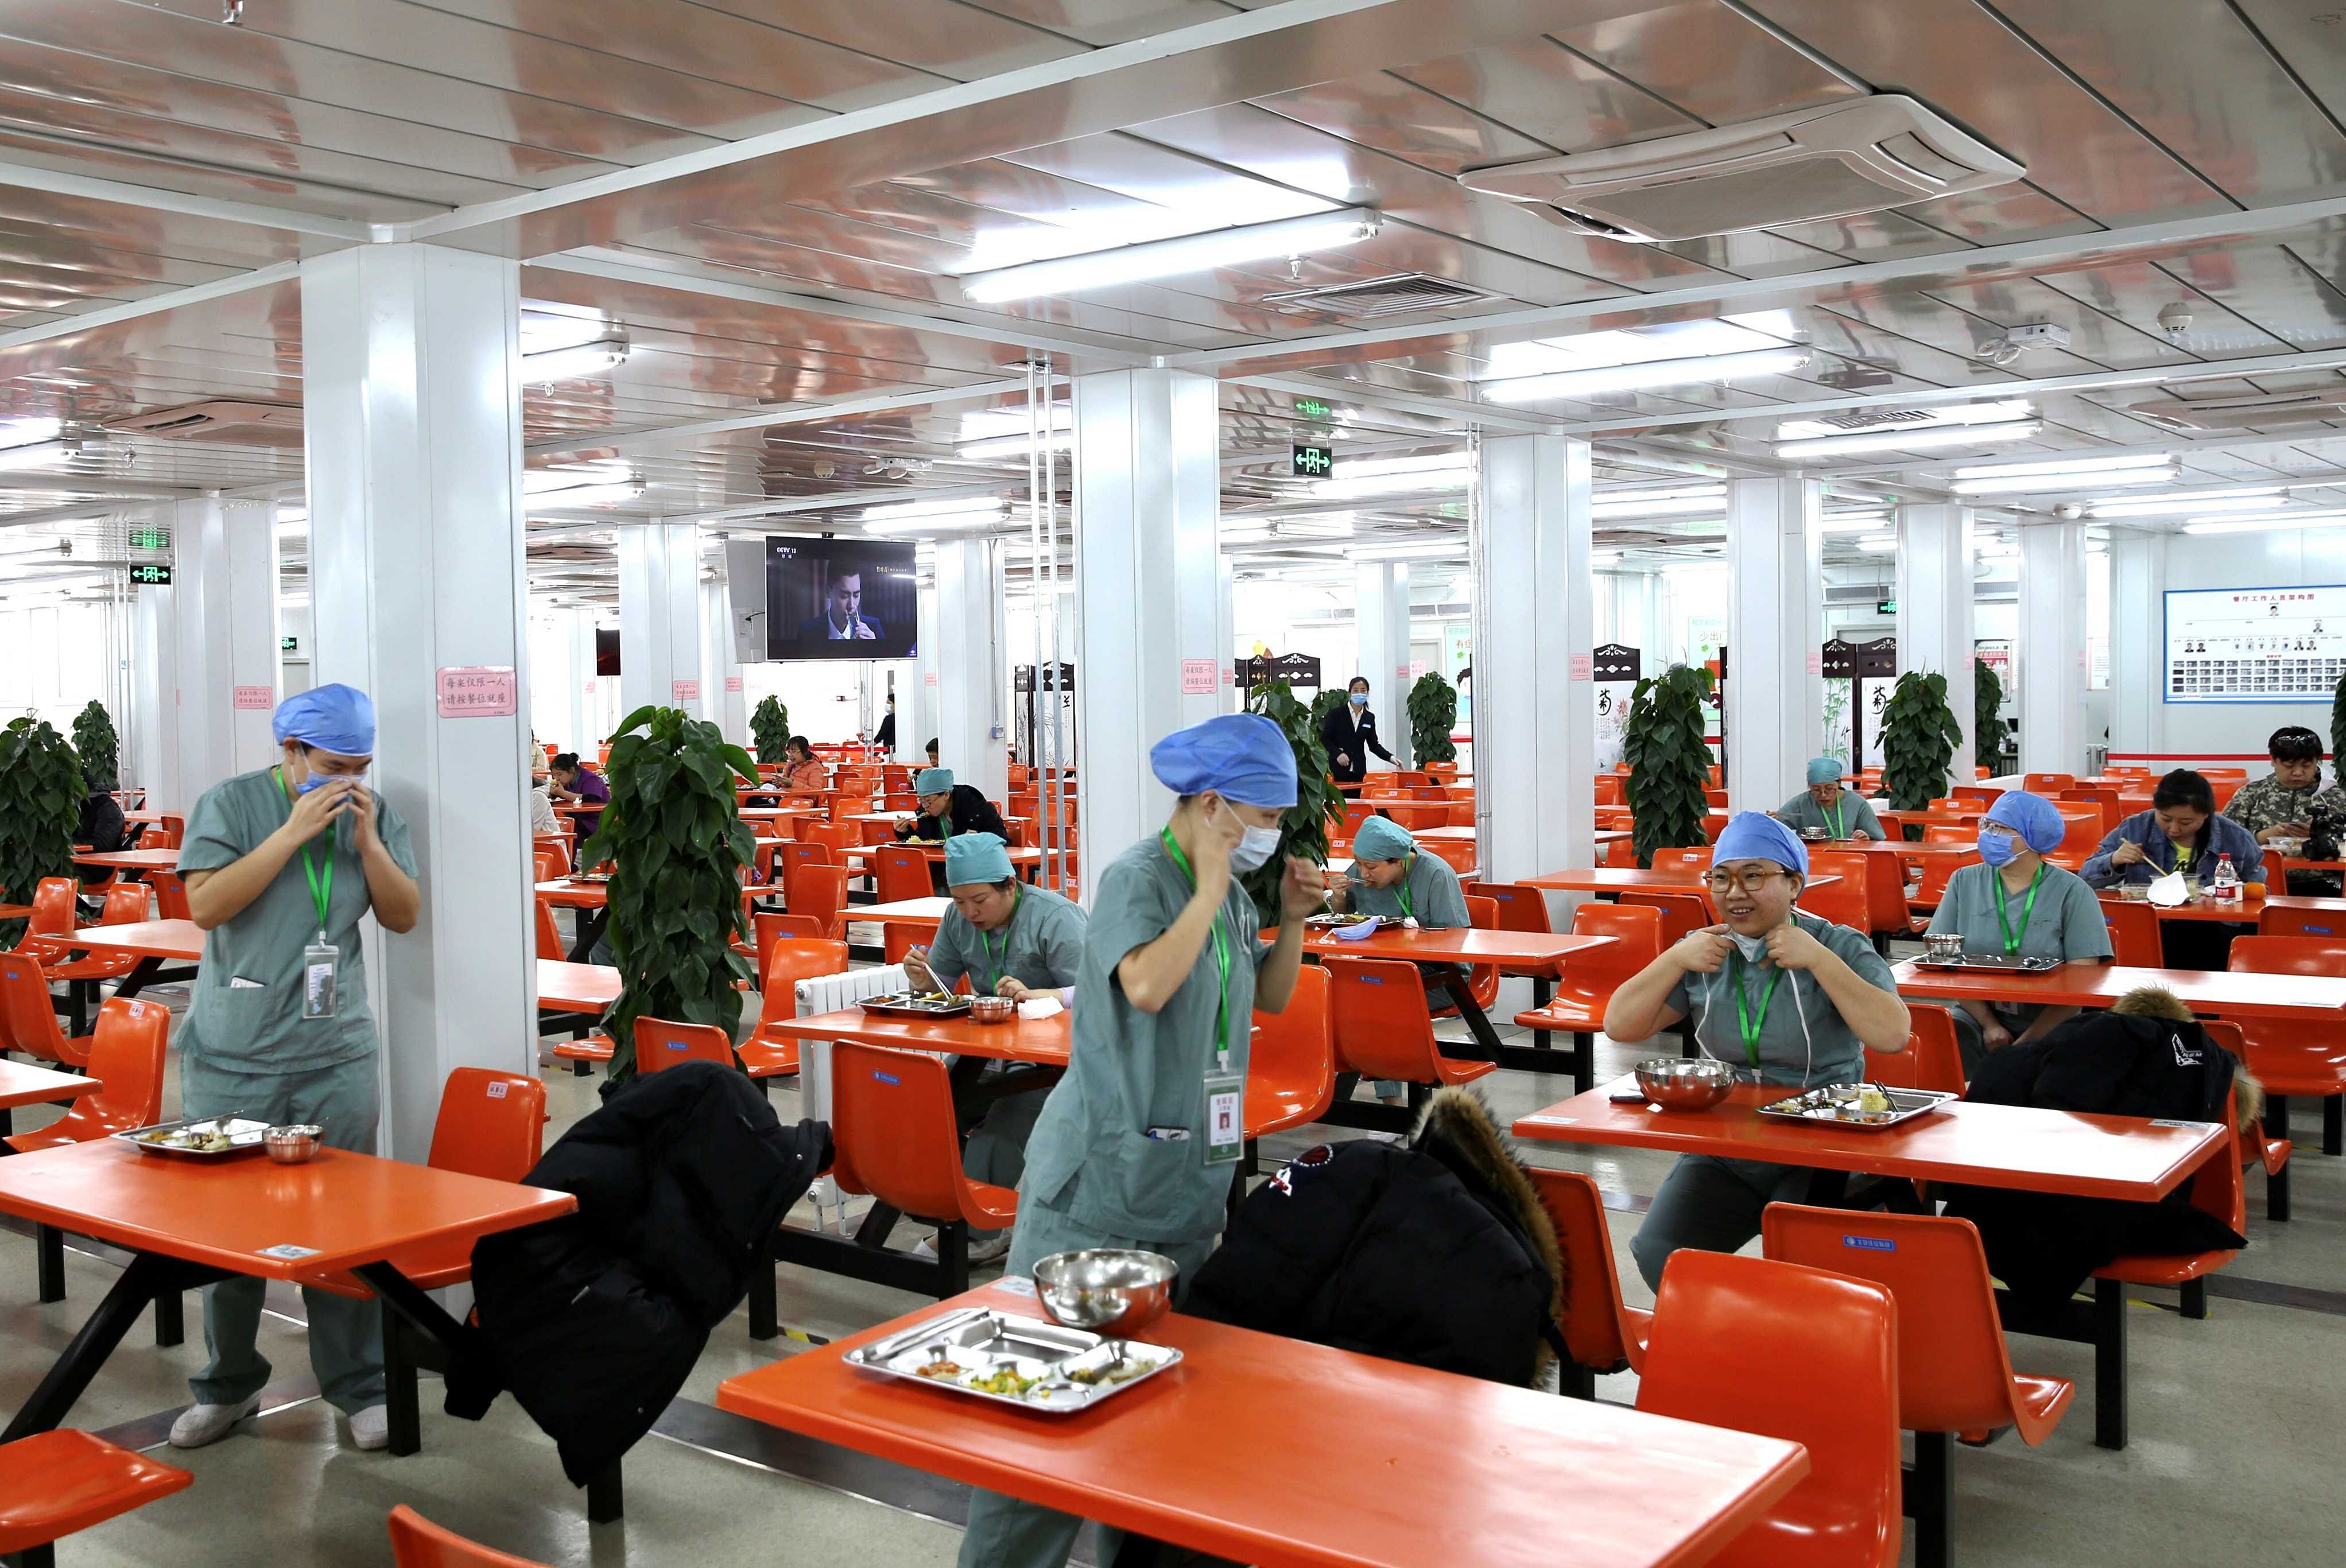 Medical workers eat at separate tables at a canteen inside Xiaotangshan Hospital, a hospital built in 2003 to treat patients with Severe Acute Respiratory Syndrome (SARS) that is now used to treat patients with coronavirus disease (COVID-19), in Beijing. (Reuters file photo)